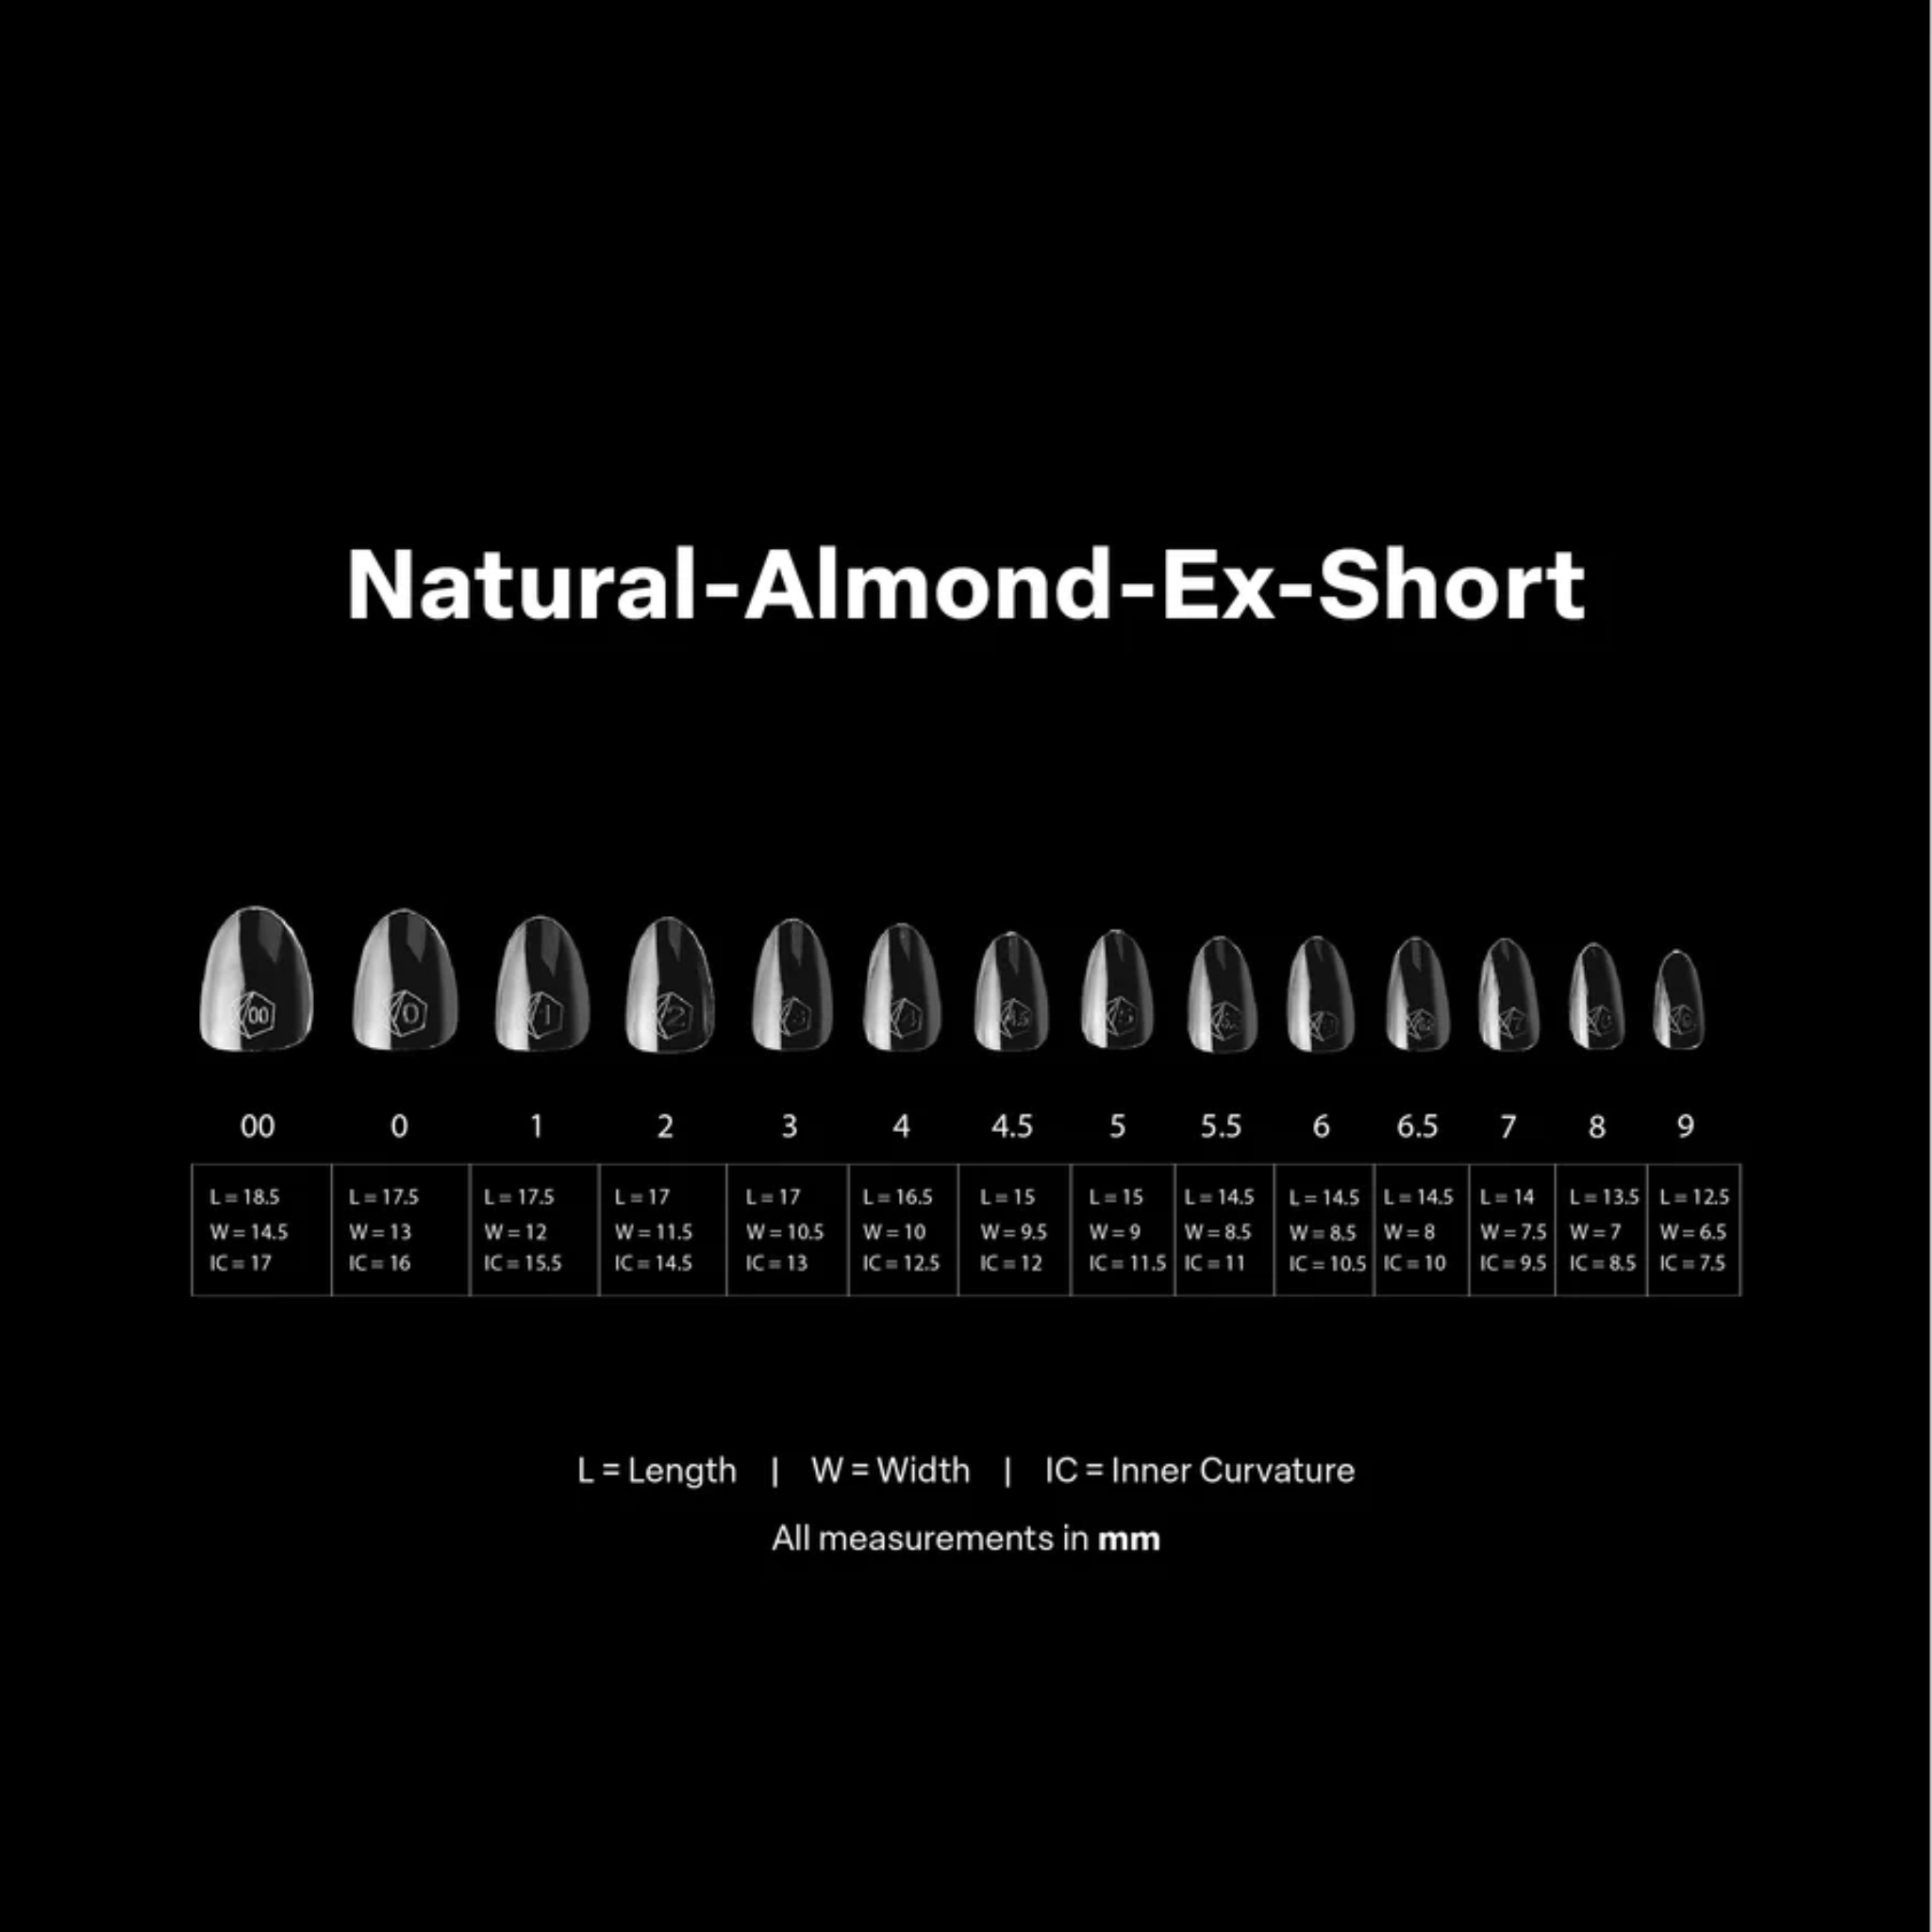 Gel X 2.0 Box of Tips: Natural Almond - Extra Short (14 Sizes)